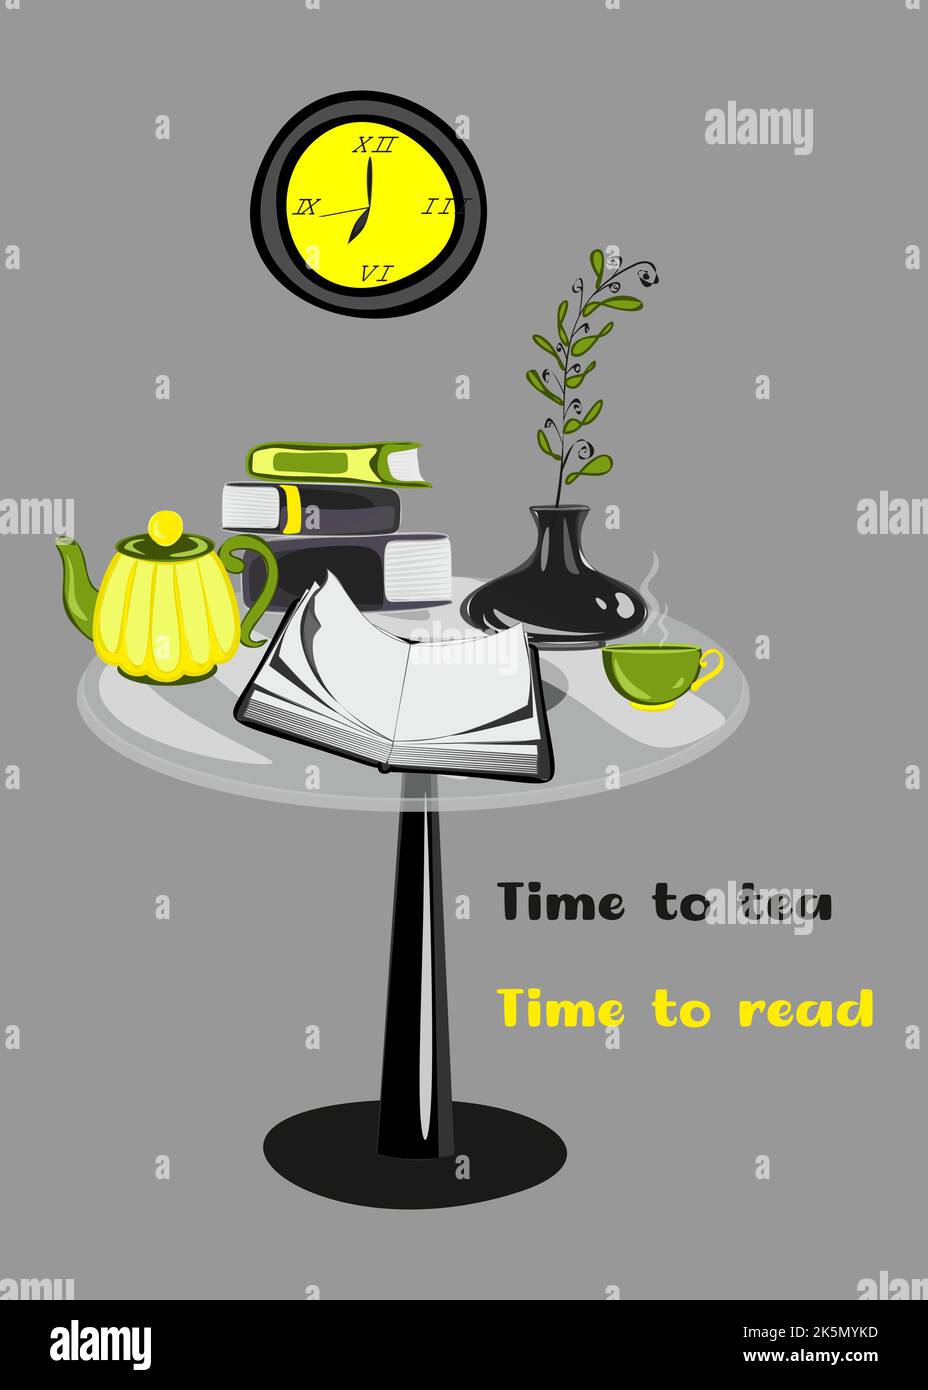 Vector poster of Glass table with books and tea pot and cup on it. Time to tea time ti read guote Stock Vector